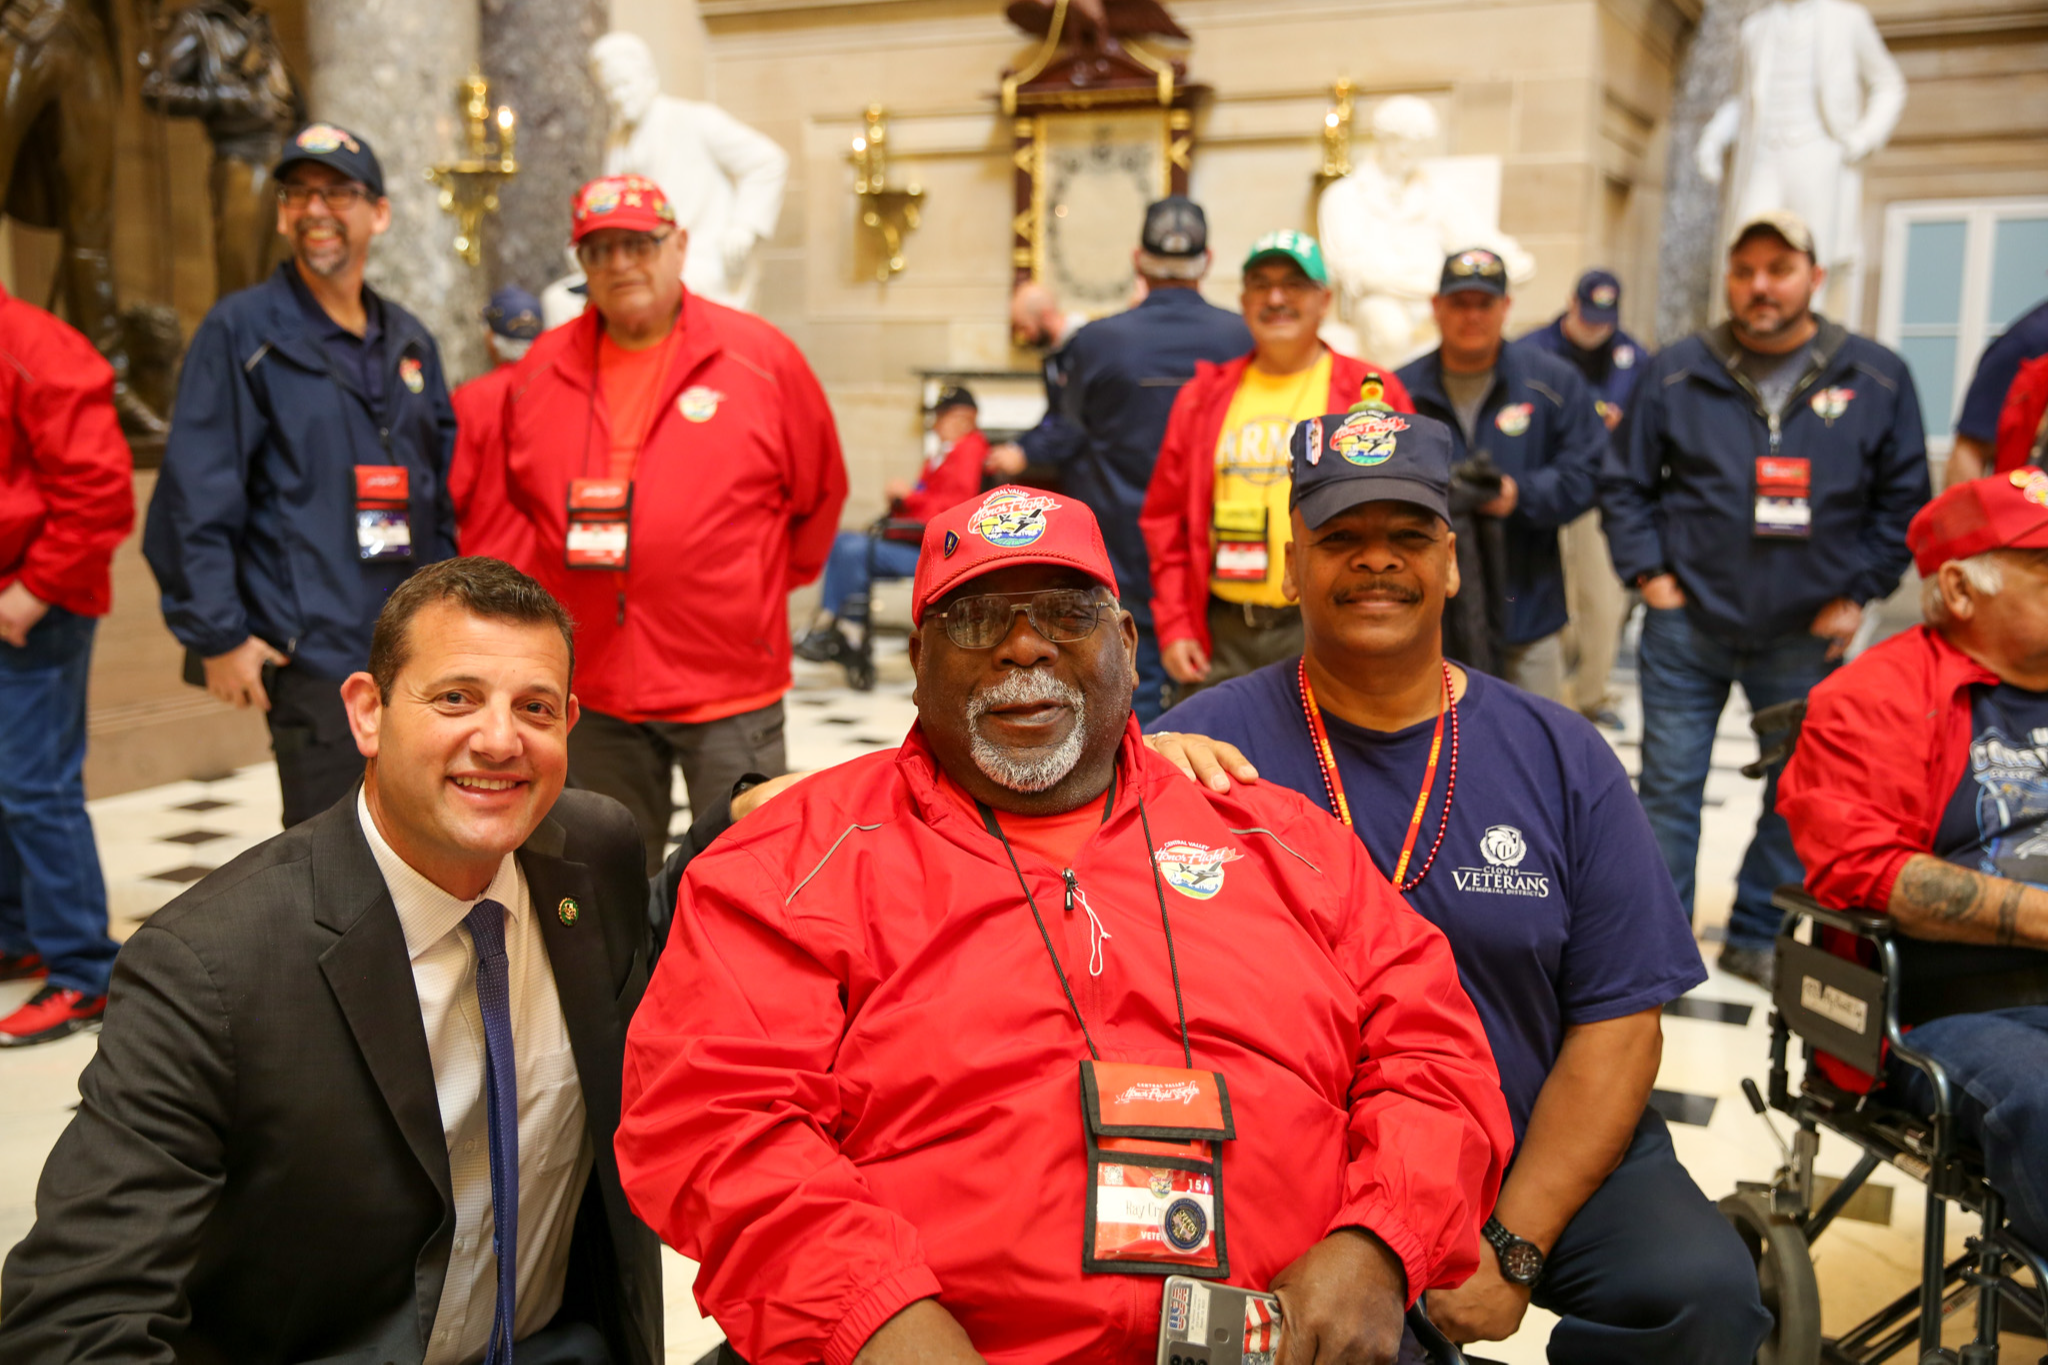 Rep. Valadao welcomes Central Valley Honor Flight to the U.S. Capitol